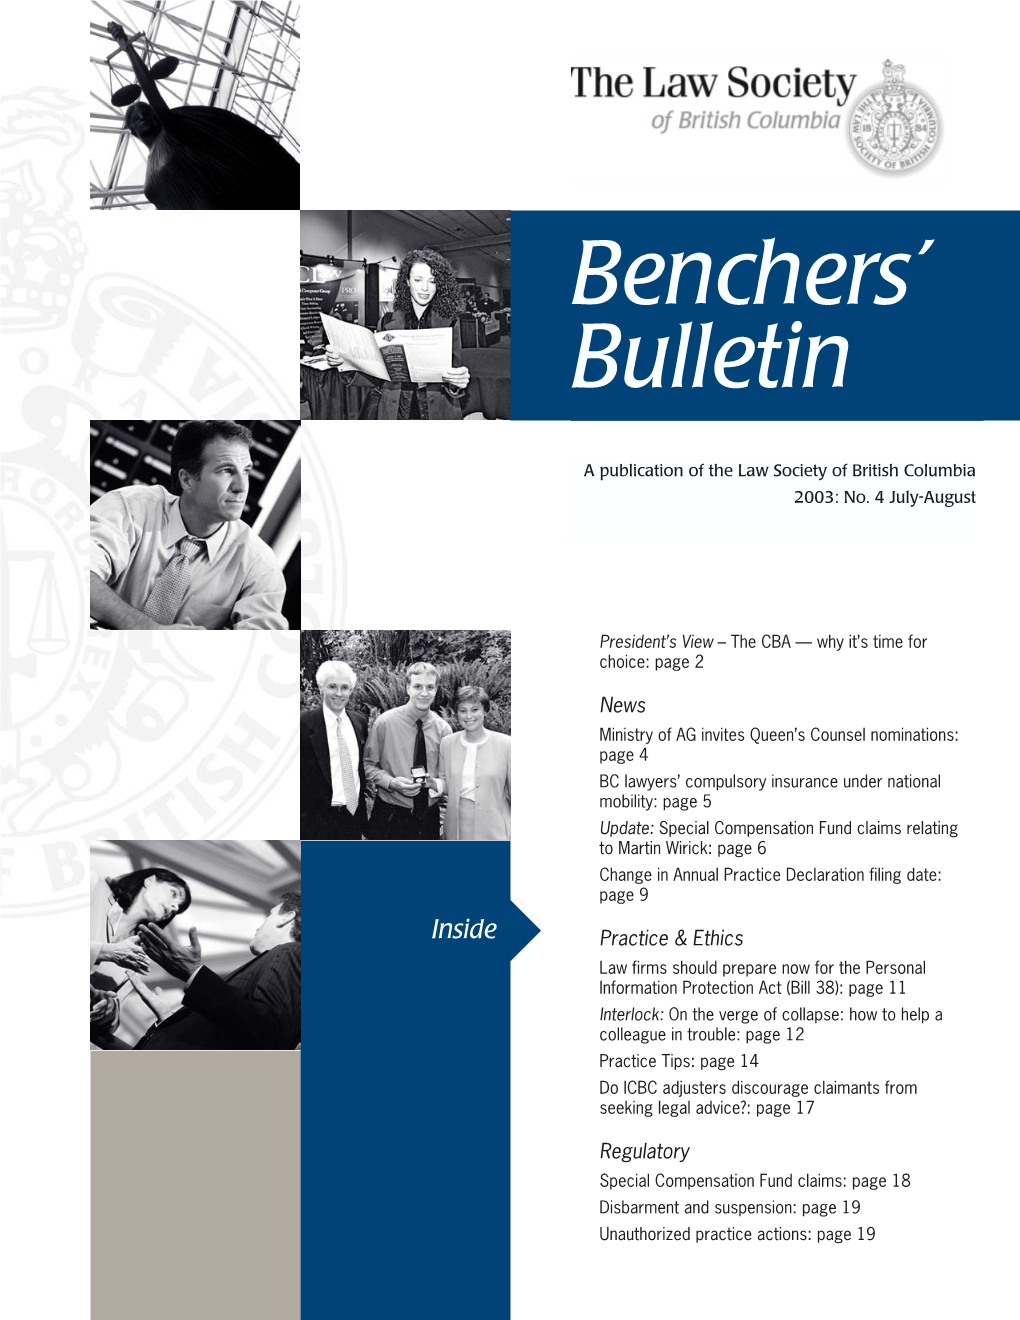 Benchers Bulletin, July-August 2003